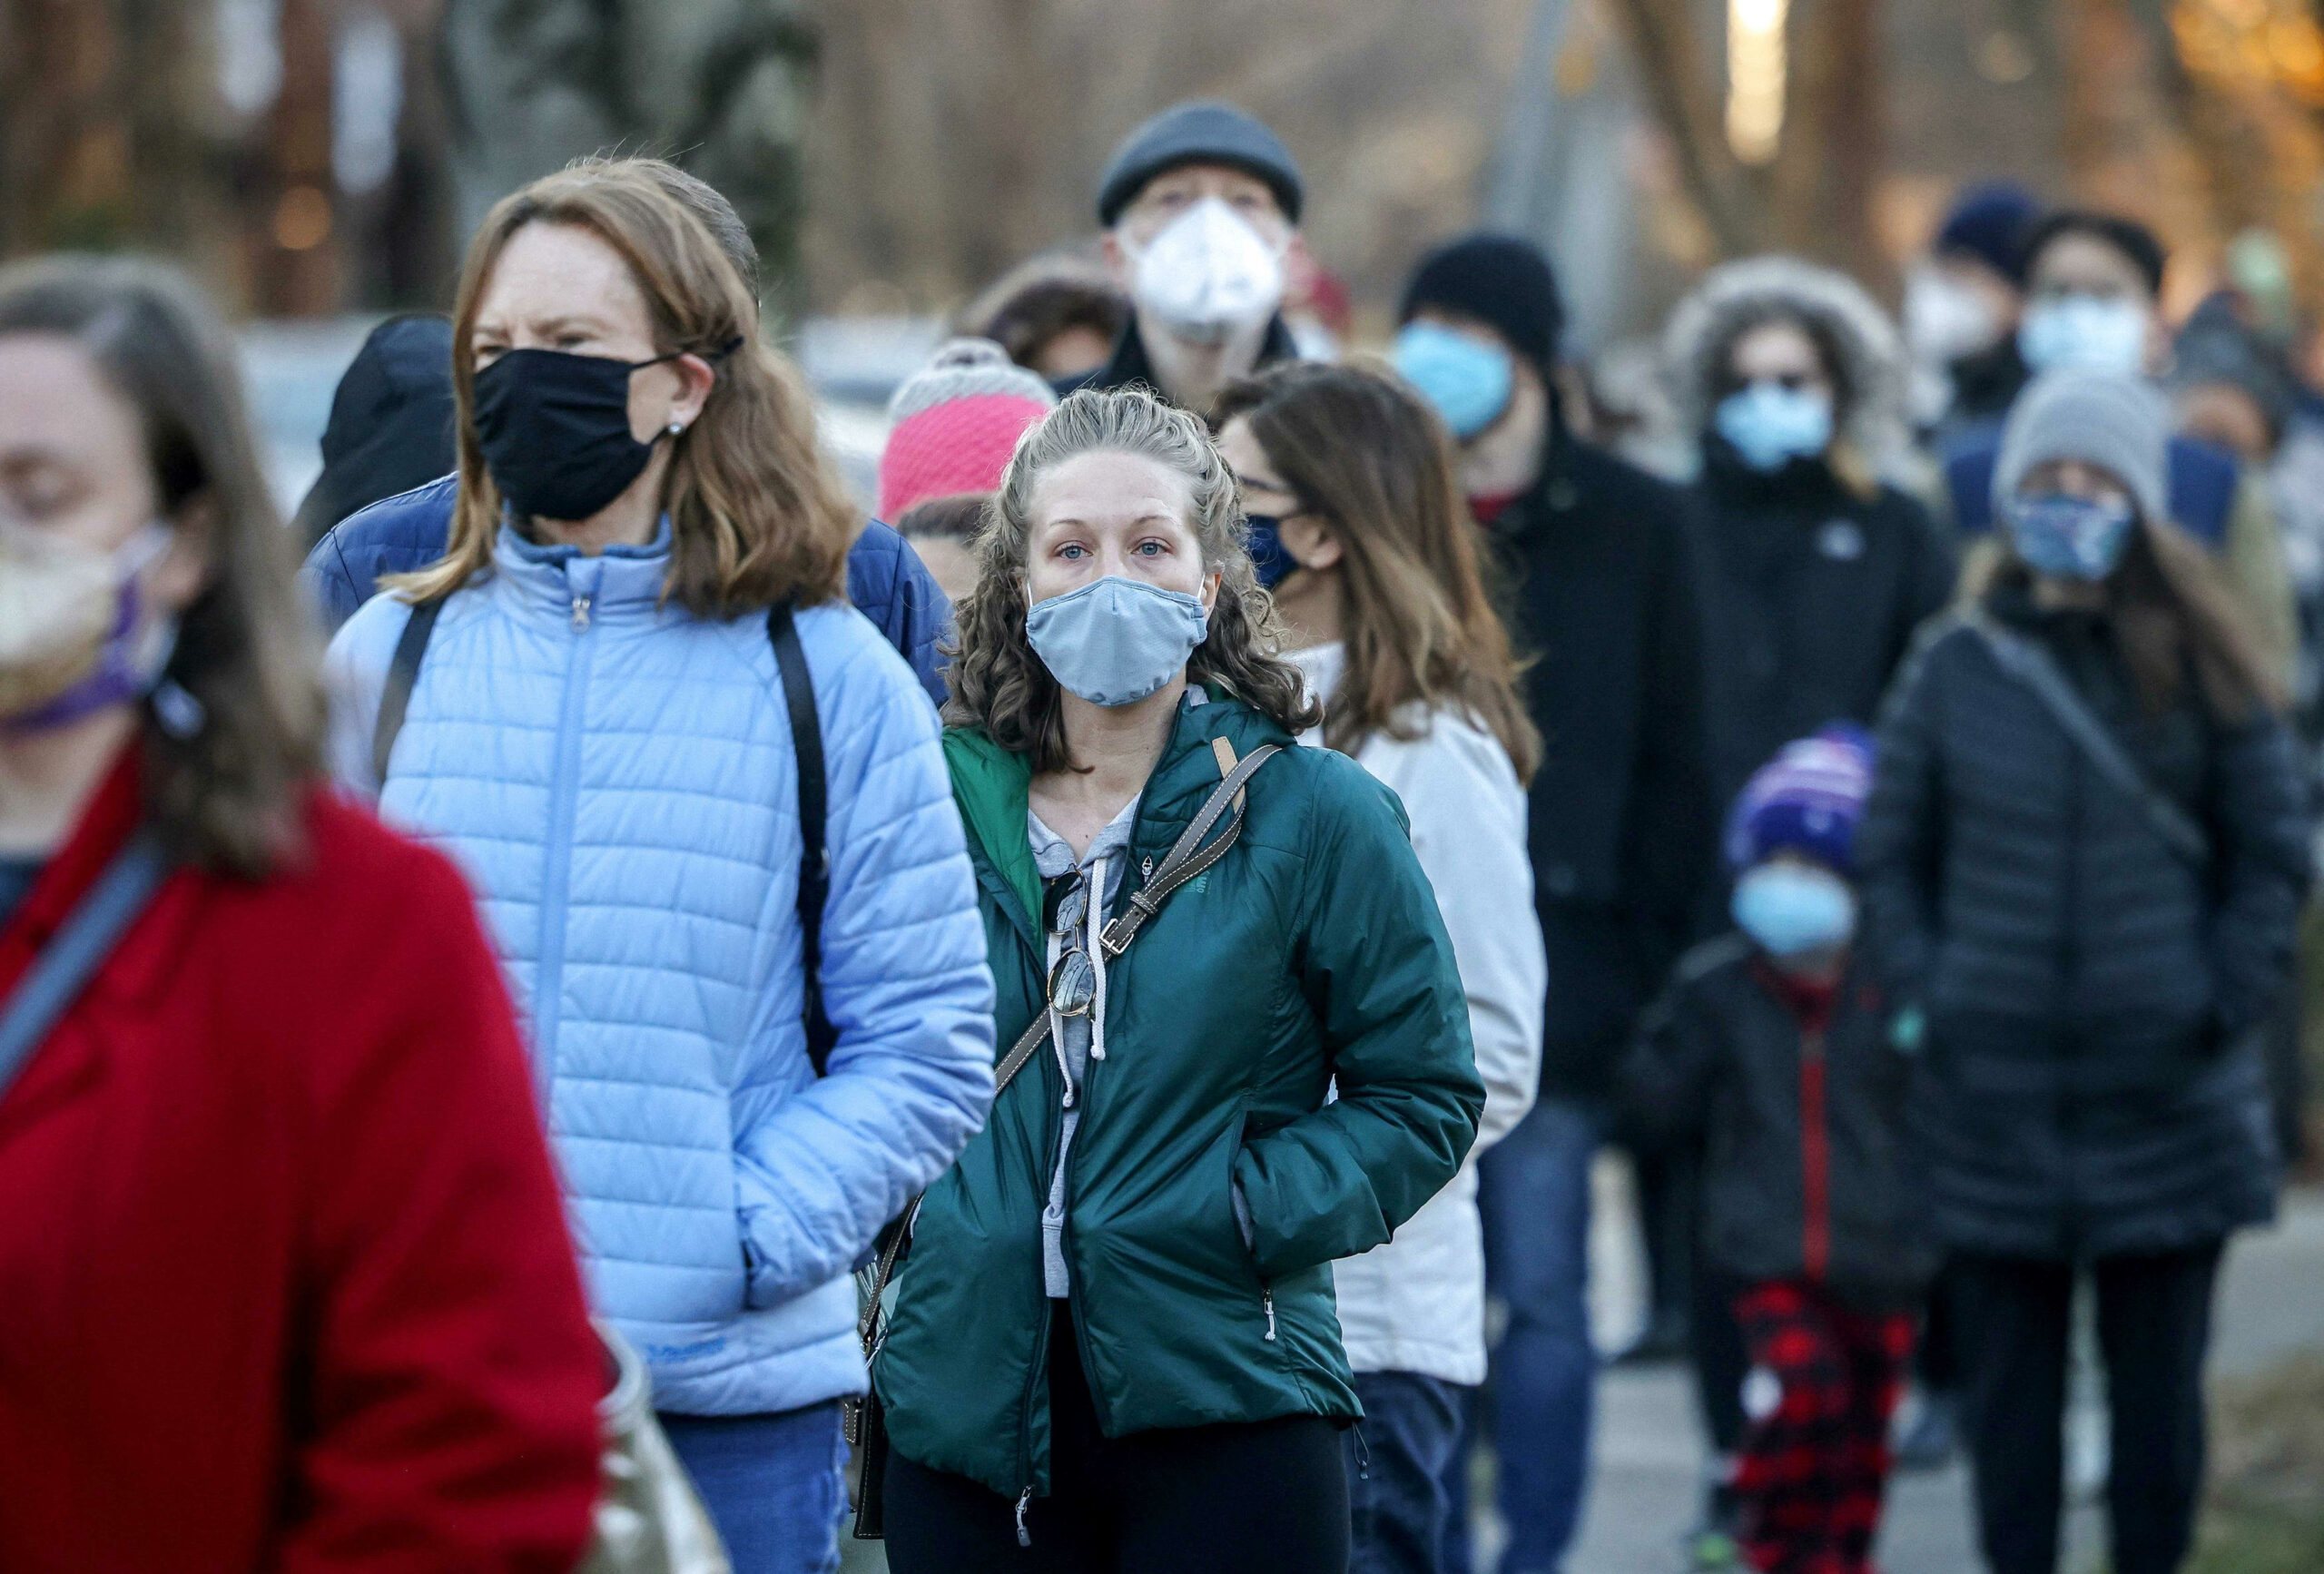 Two years since Covid was first confirmed in U.S., the pandemic is worse than anyone imagined